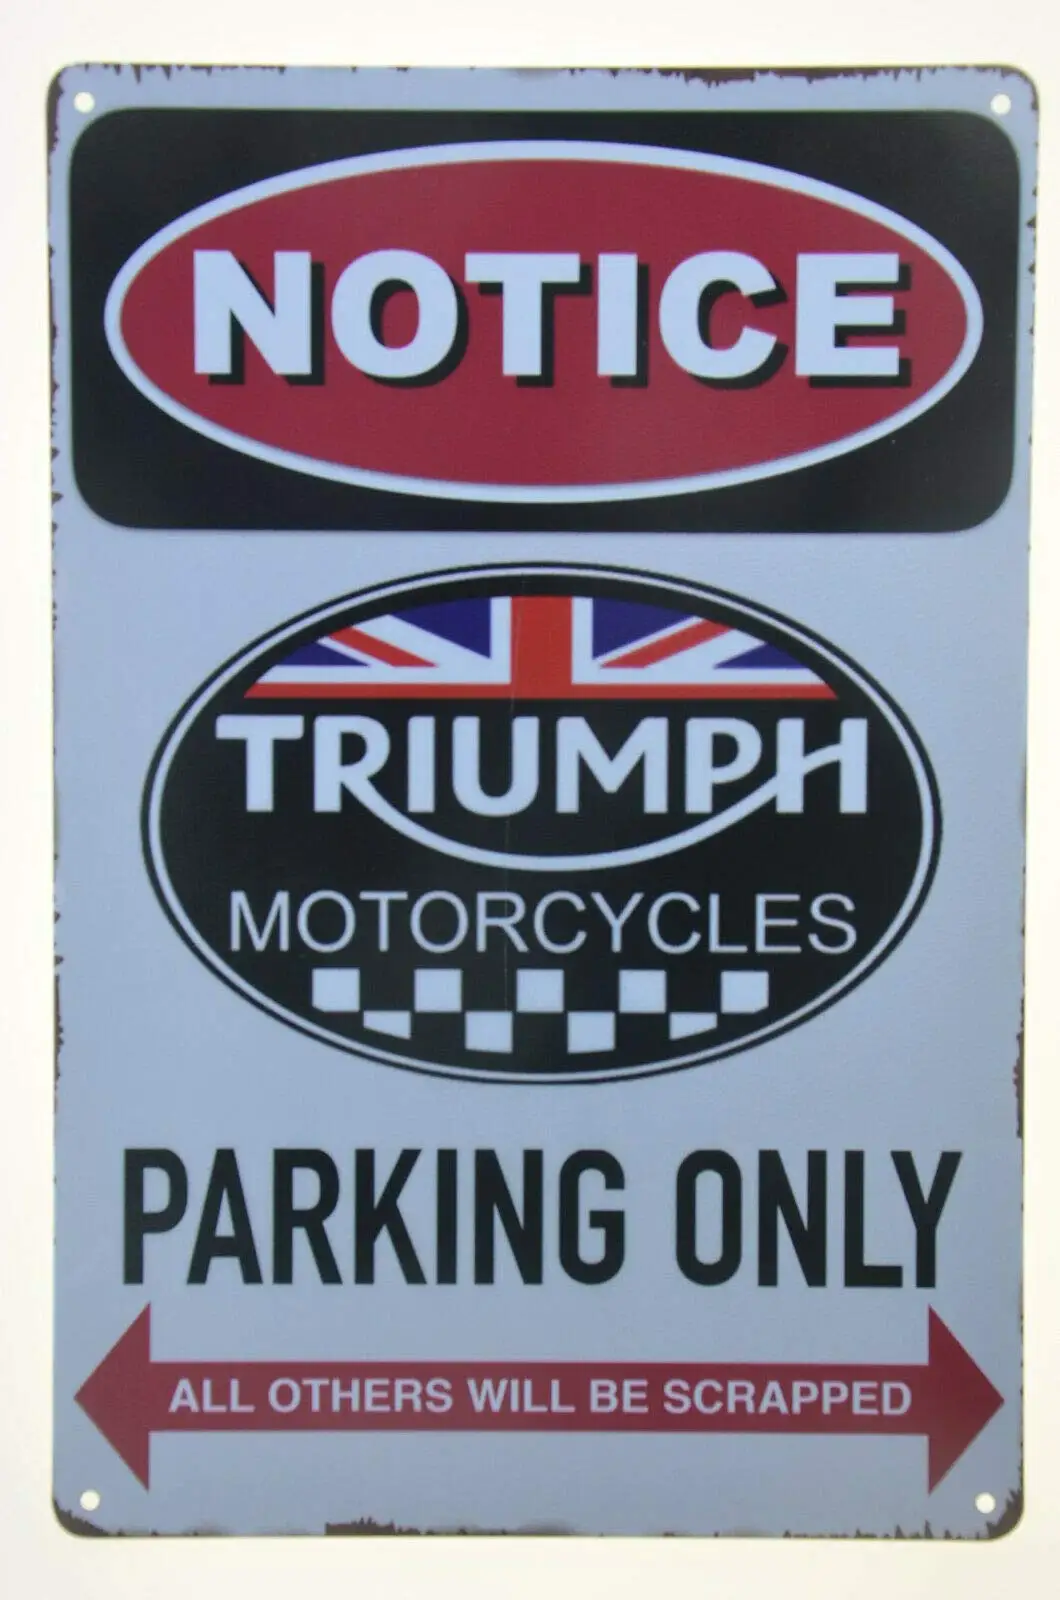 

Metal Tin Signs Triumph Motorcycle Garage Parking Only Notice Retro Wall Decor for Bars Restaurants Cafes Pubs 8x12 Inch